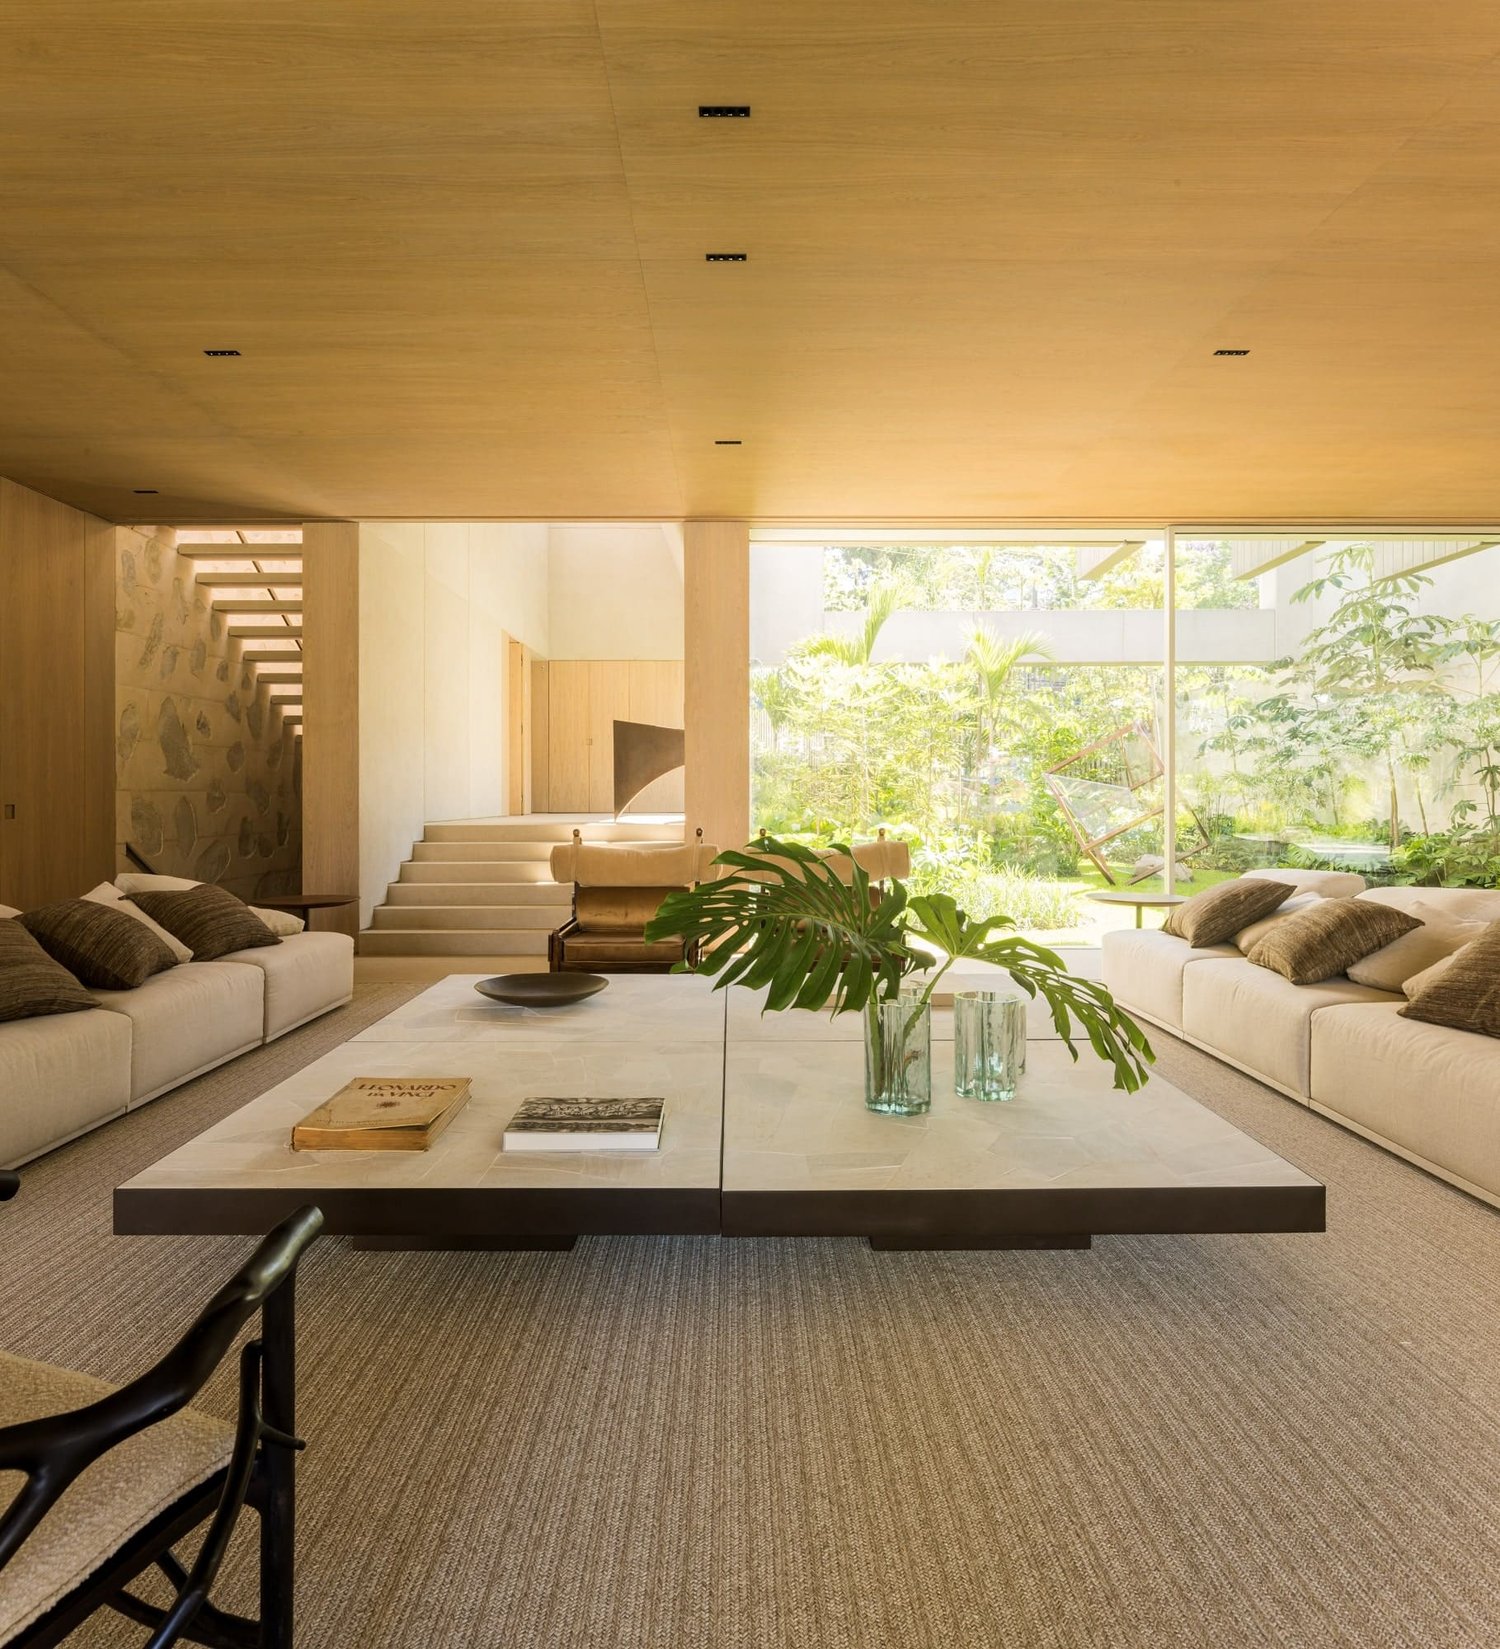 Entrance hall to meeting room to visitors and family reunion, with view to the Japanese garden – Art piece by José Bento, from Millan Gallery (São Paulo). Fusca sofa, designed by Arthur Casas for Micasa. Pair of Tonico armchairs, by Sergio Rodrigues | Fernando Guerra